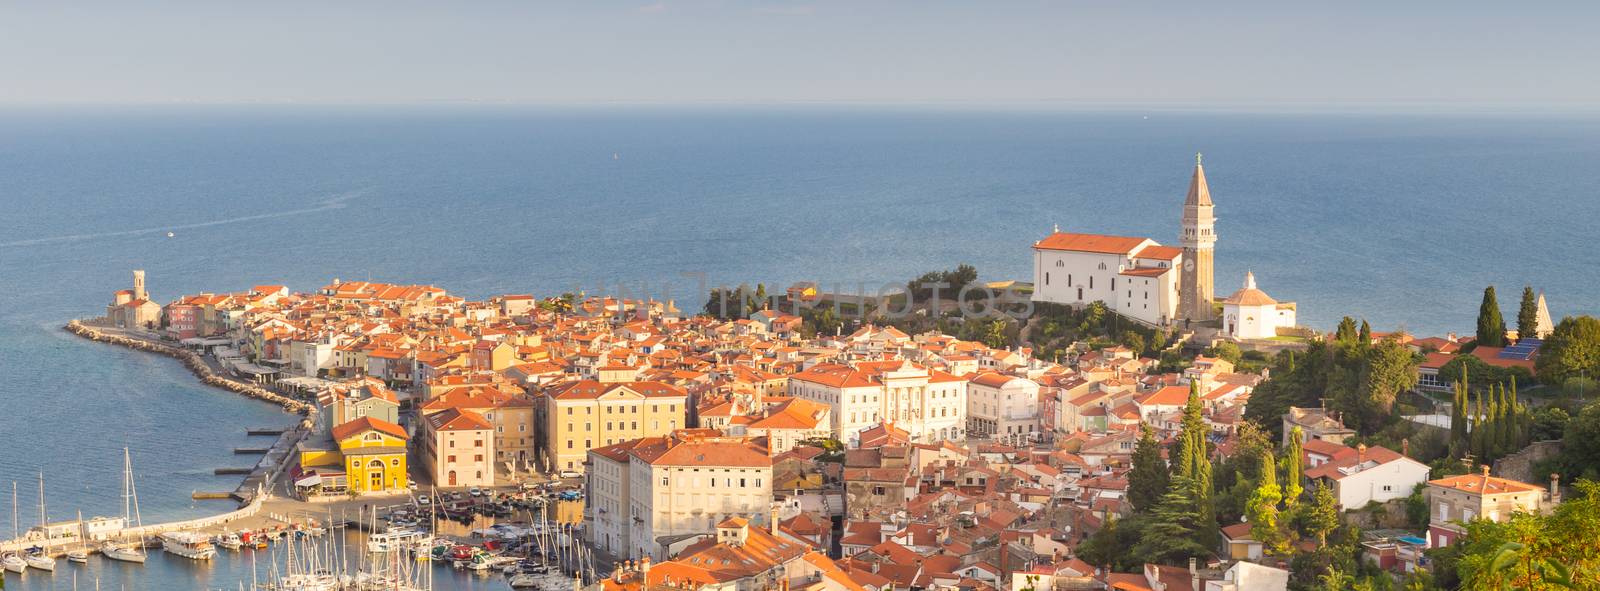 Picturesque old town Piran, Slovenia. by kasto